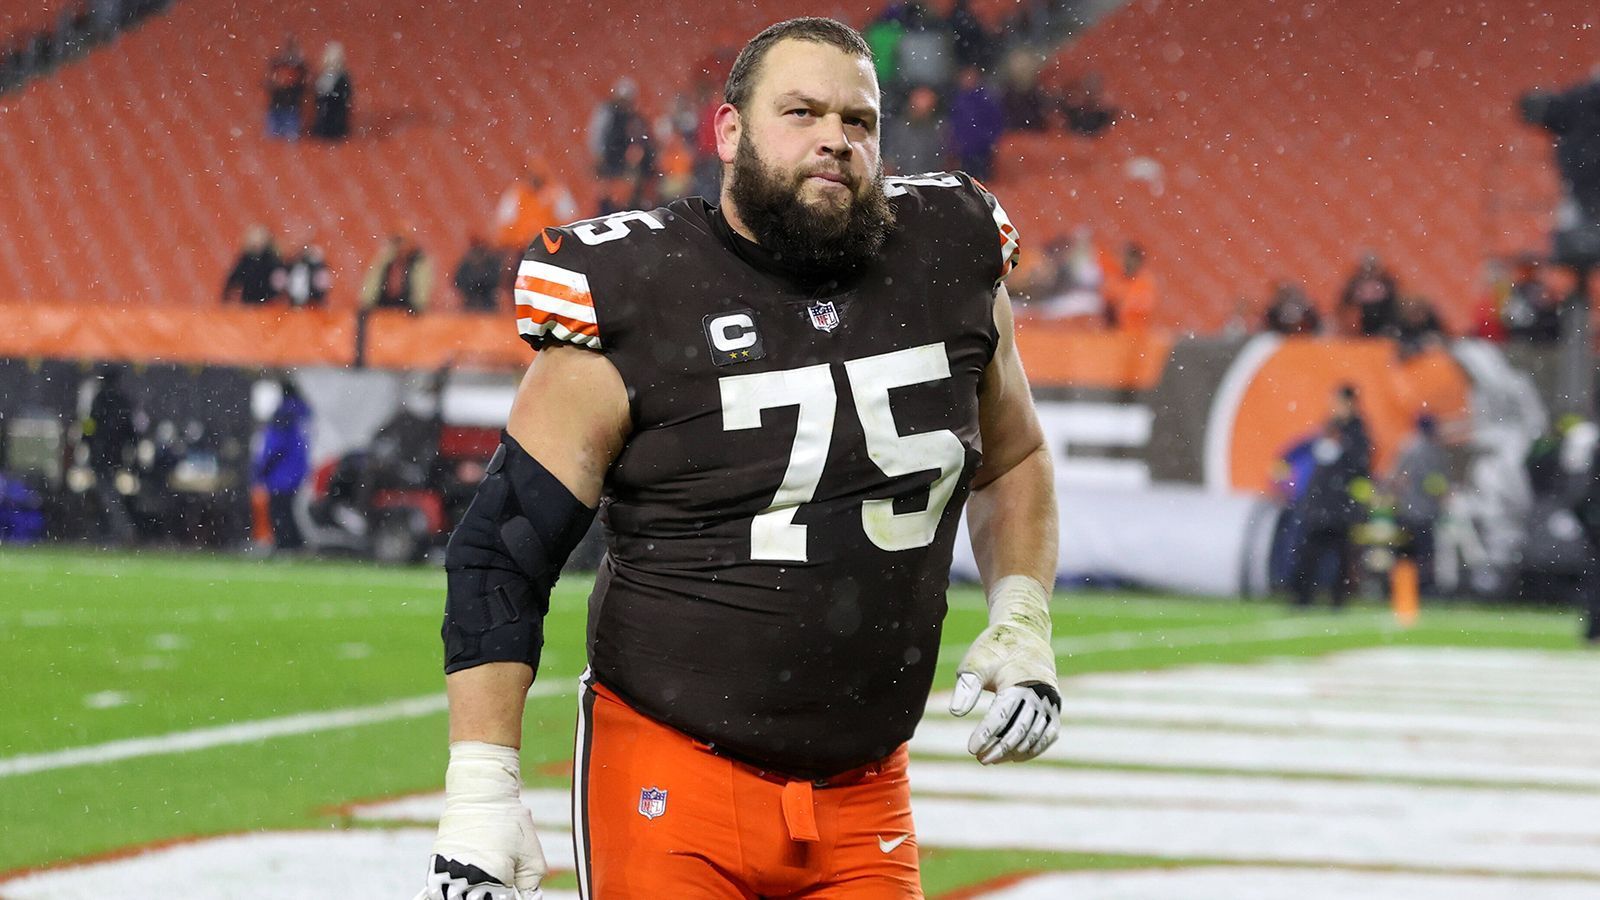 
                <strong>Left Guard: Joel Bitonio</strong><br>
                &#x2022; Aktuelle Franchise: Cleveland Browns<br>&#x2022; In der NFL seit: 2014<br>
              